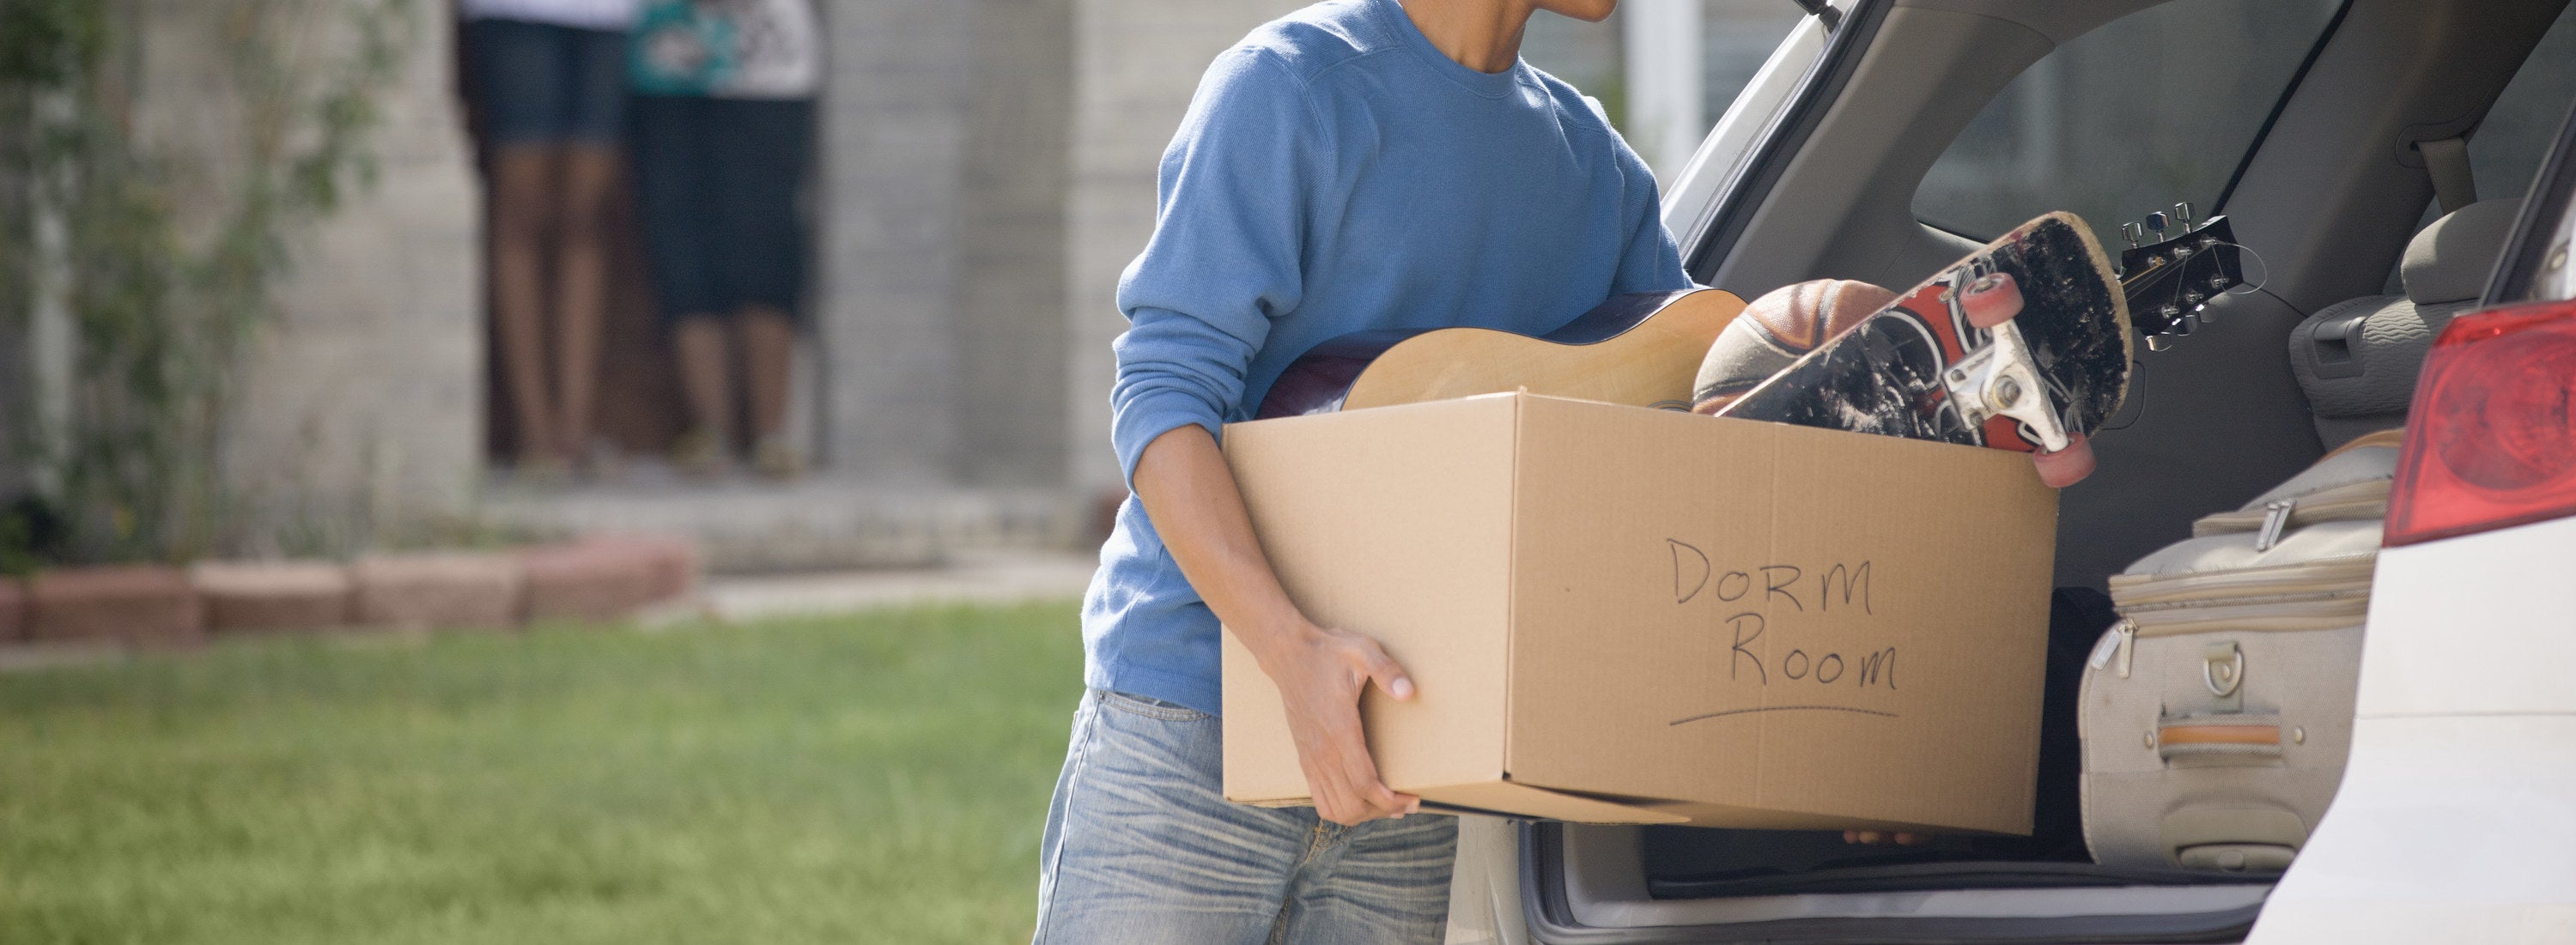 A young person putting a box of belongings into the back of a car